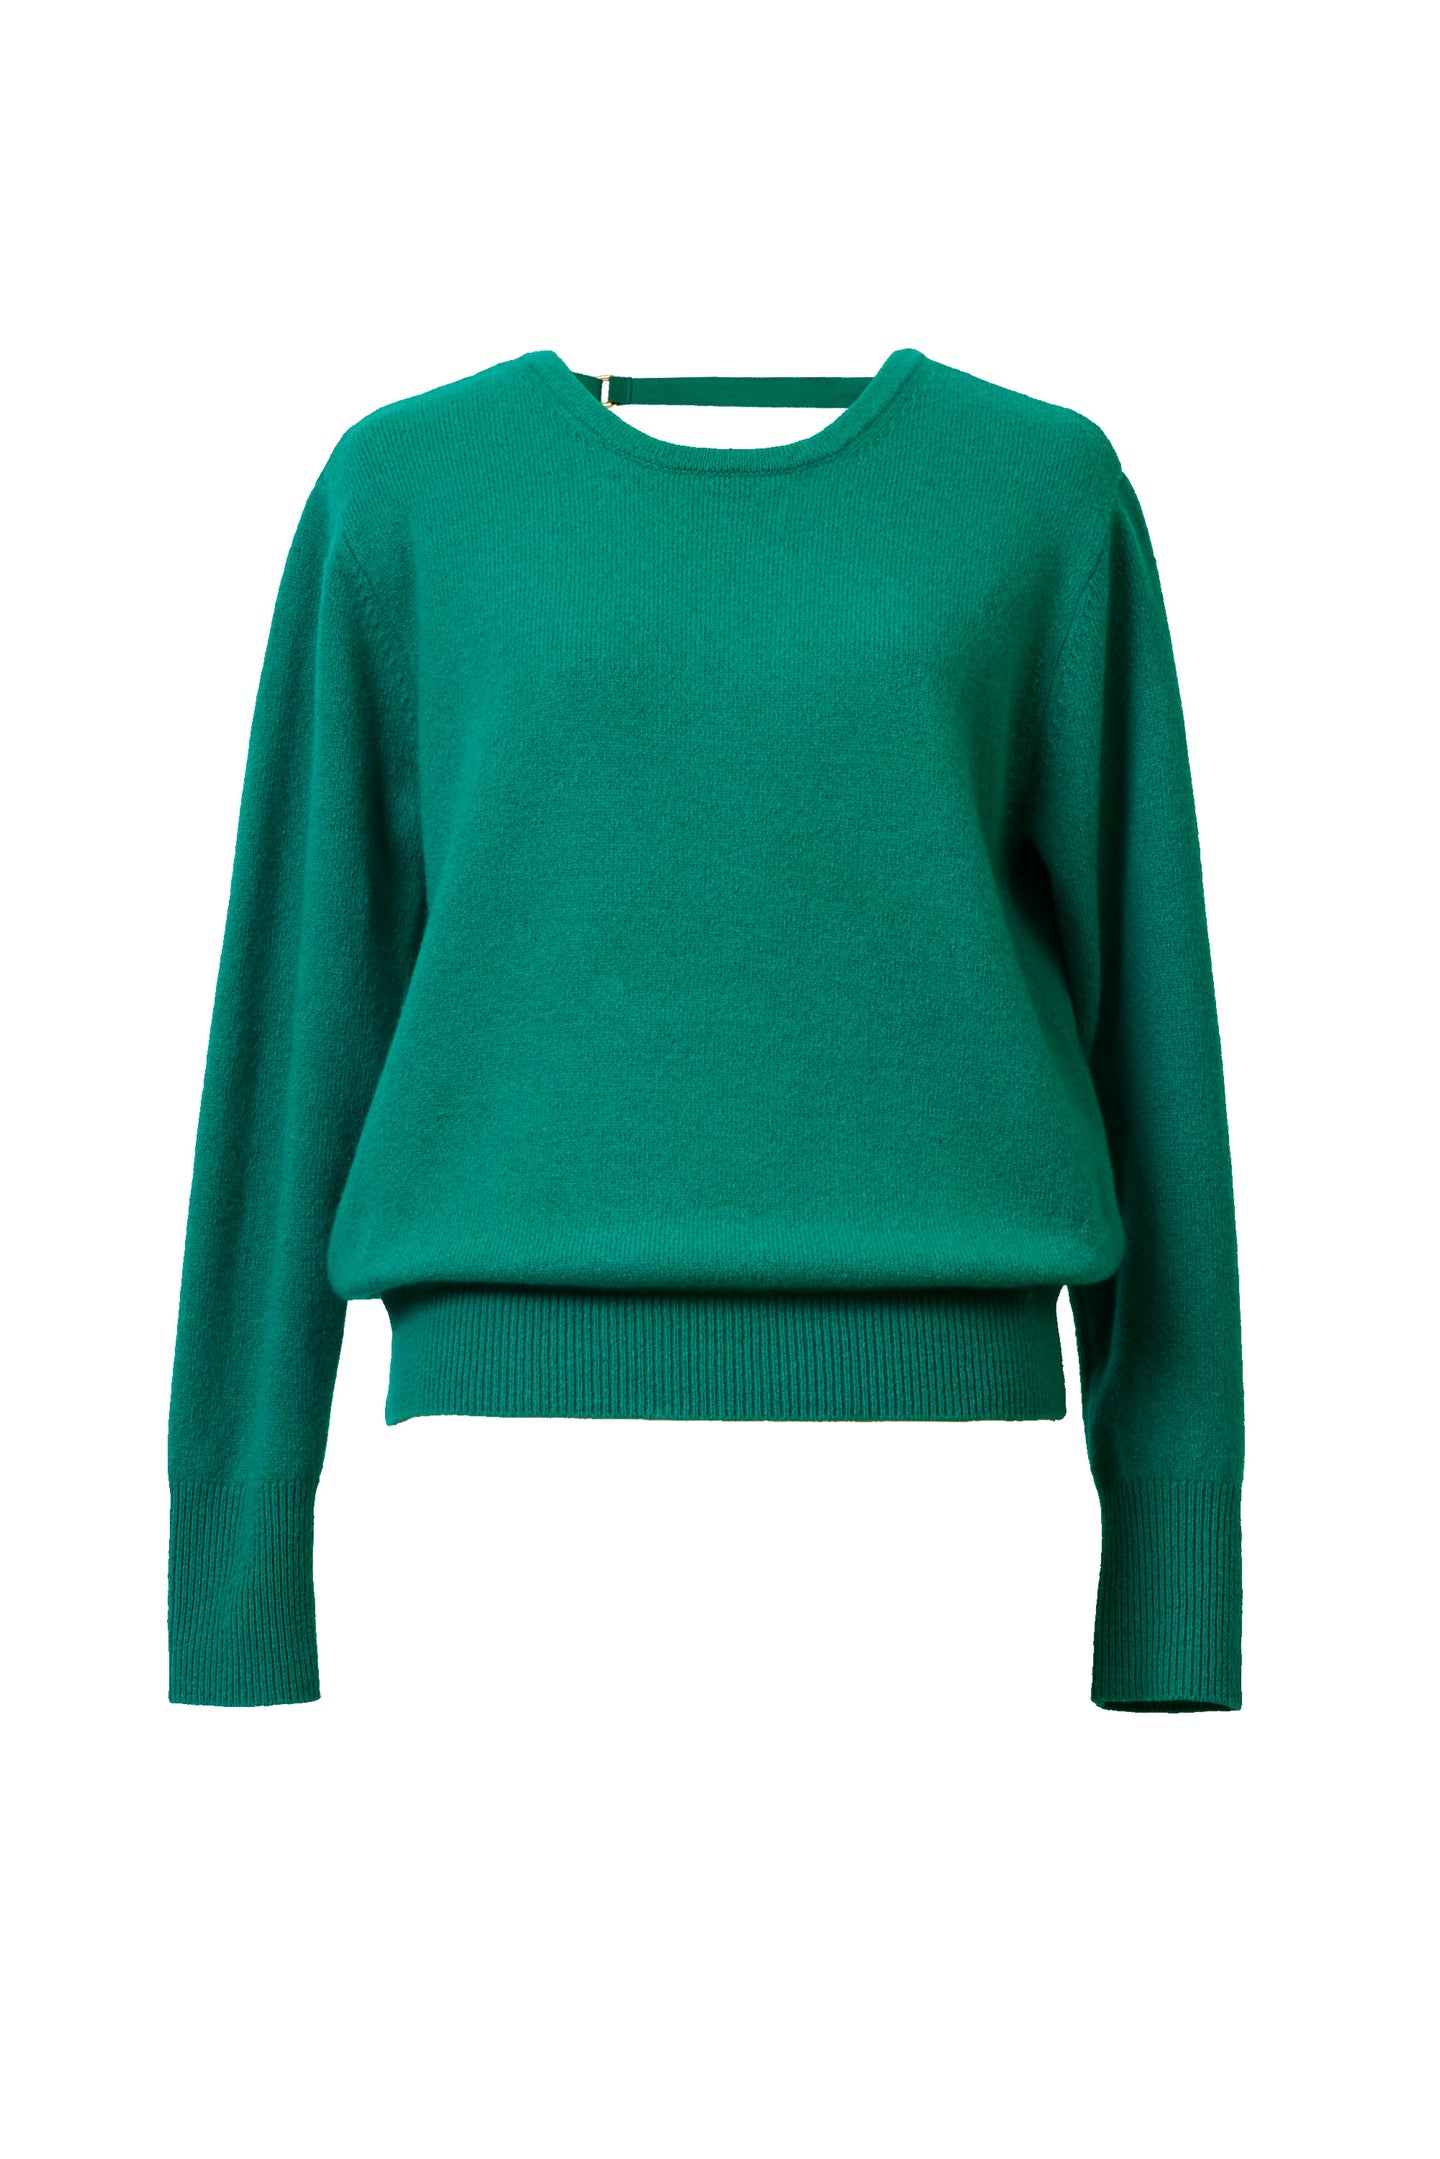 Eco Cashmere Back Open knit Top | Emerald